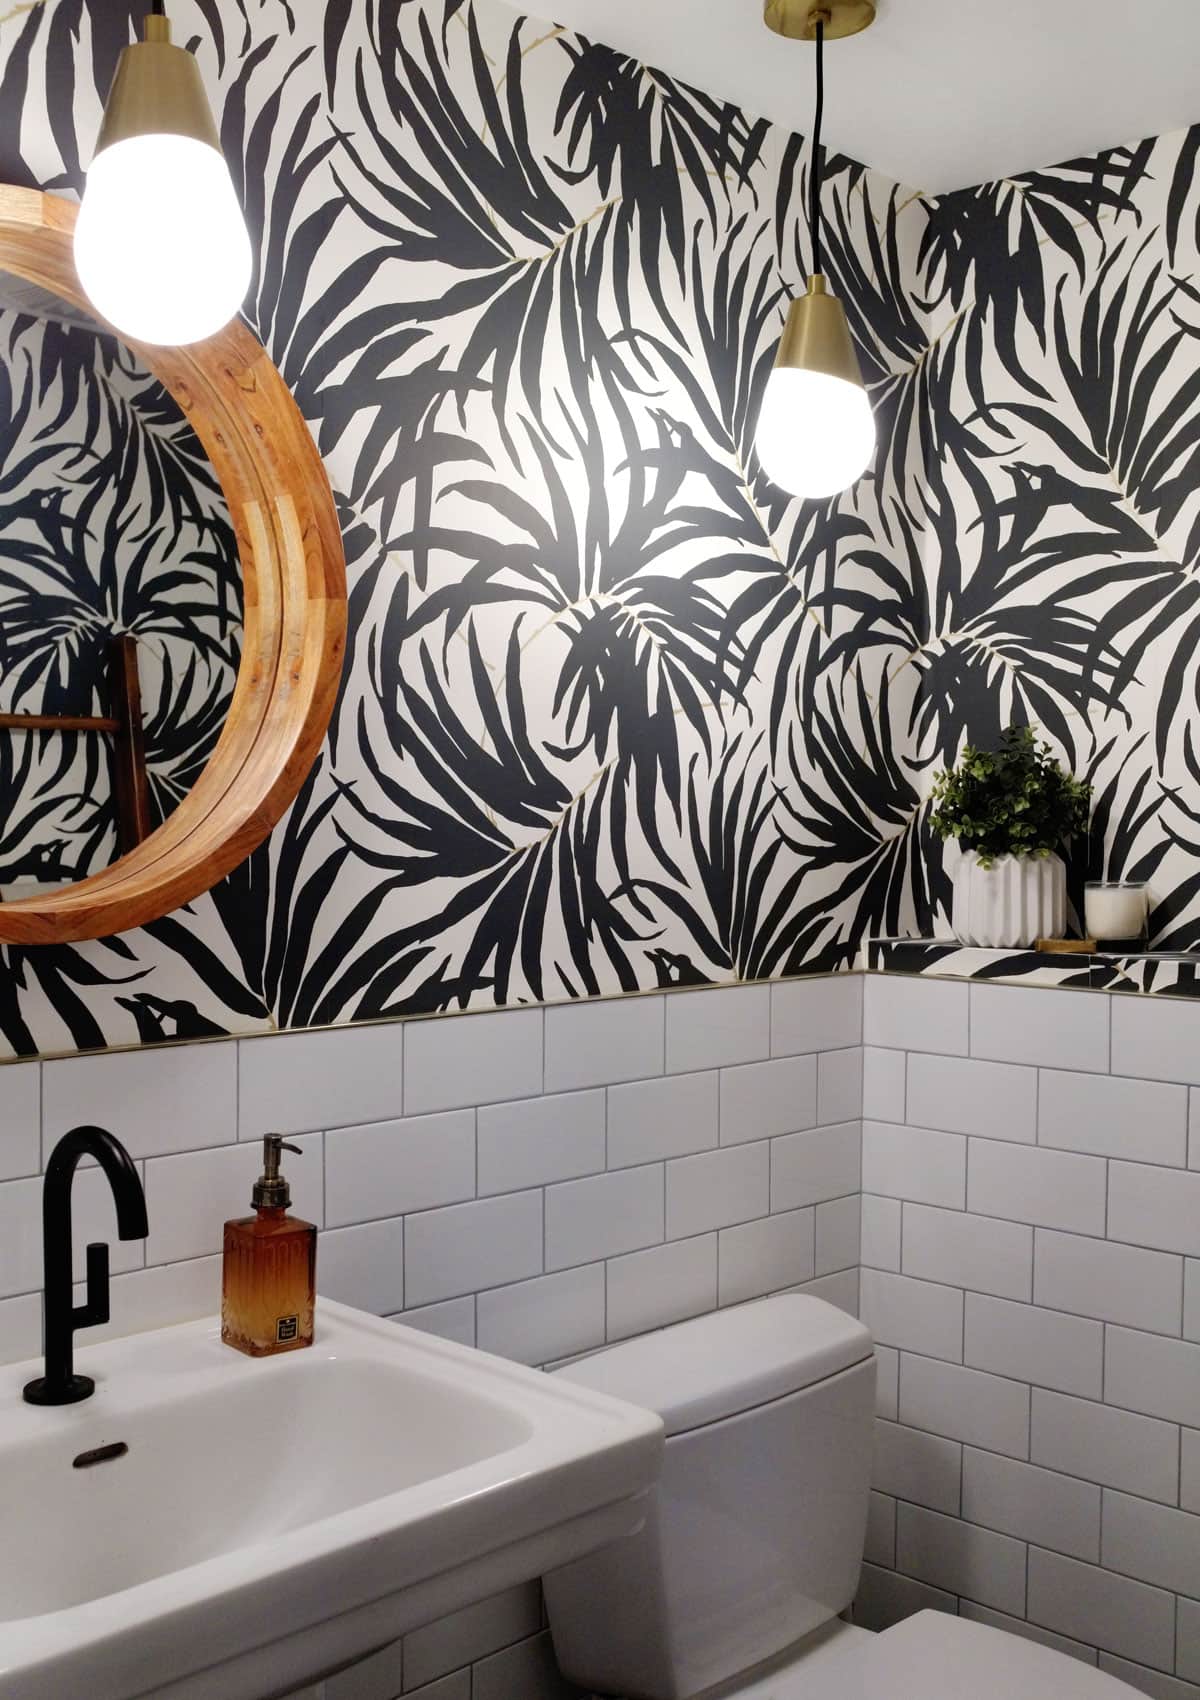 Black and White Bathroom Renovation Before and After - Transforming an old, outdated, boring bathroom and creating a stunning modern black and white bathroom with palm frond wallpaper and subway tile.